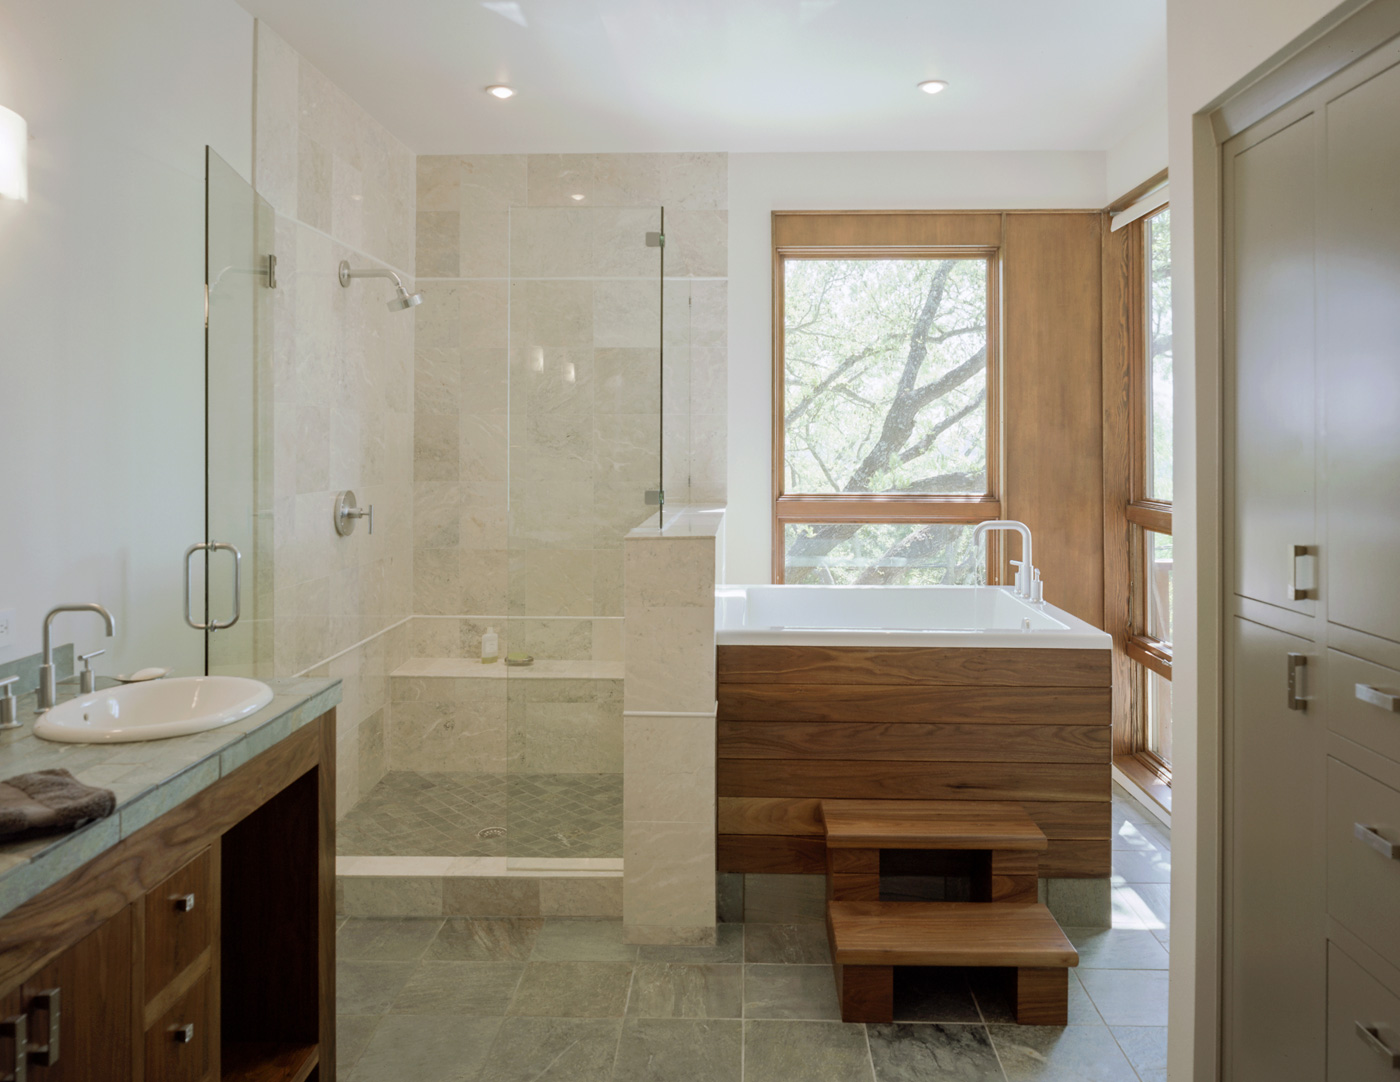 Separated shower and bathtub of a master bedroom.